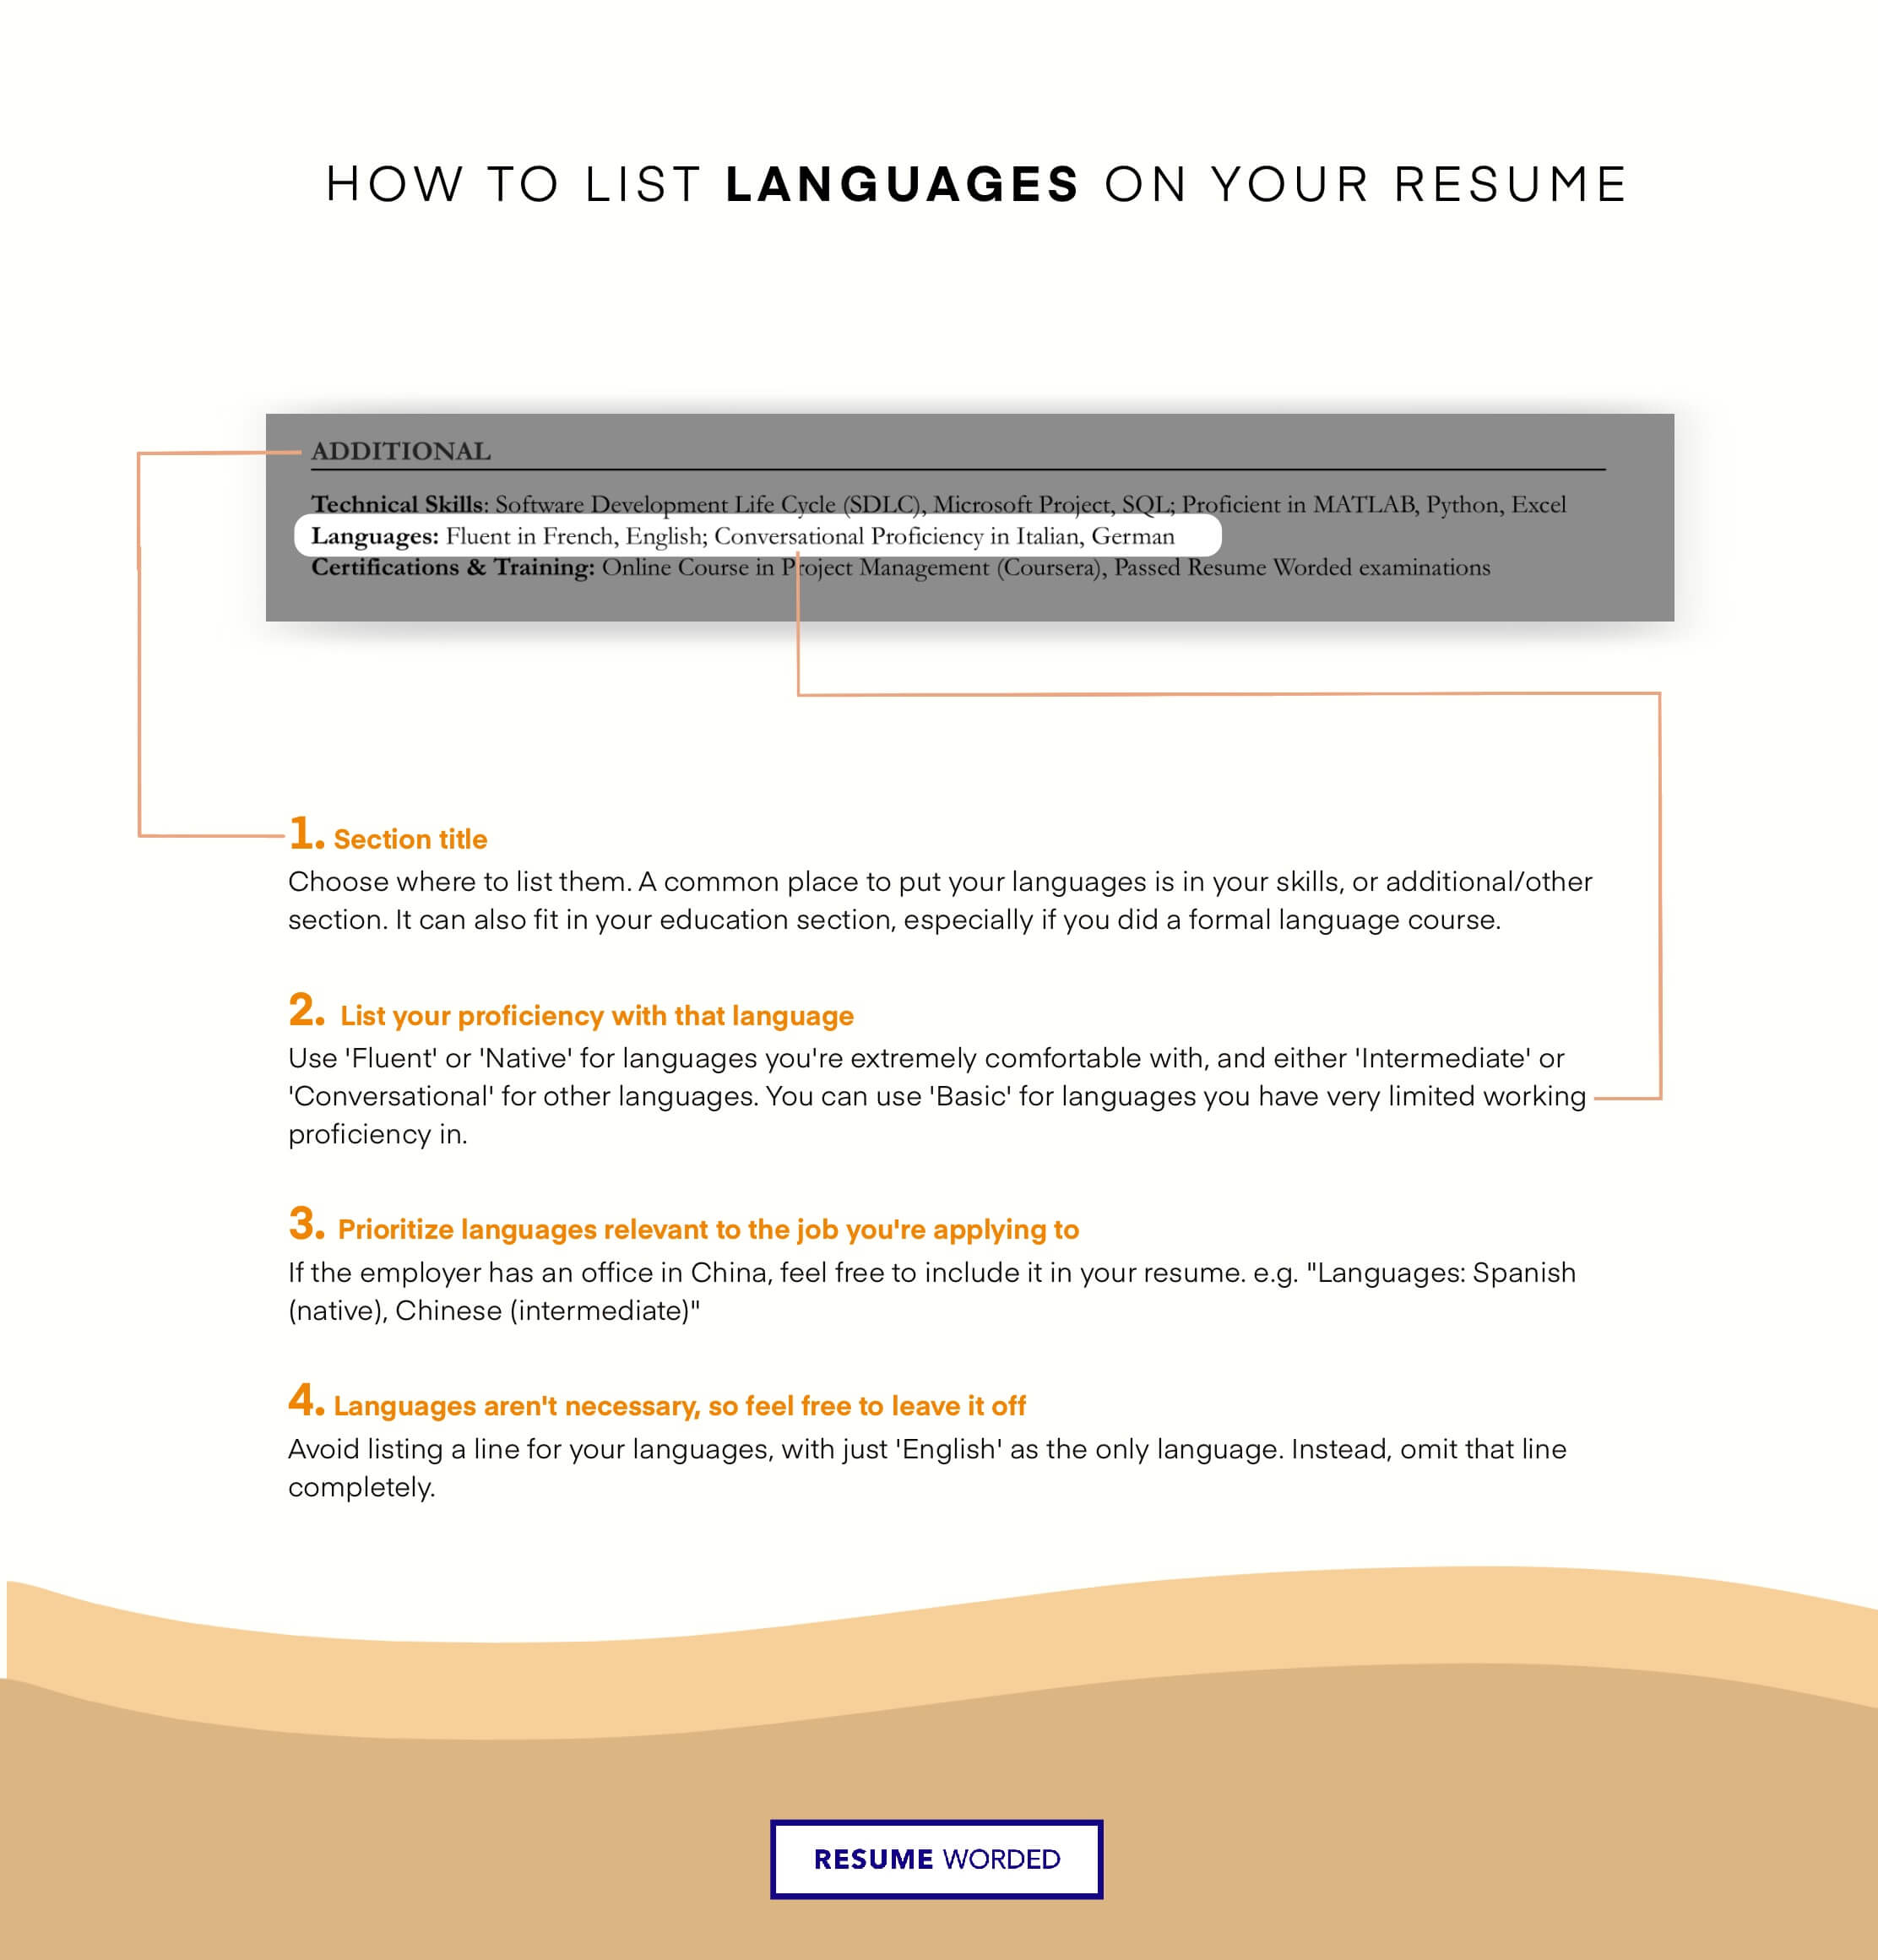 Include any additional languages spoken. - Growth Marketing Manager Resume